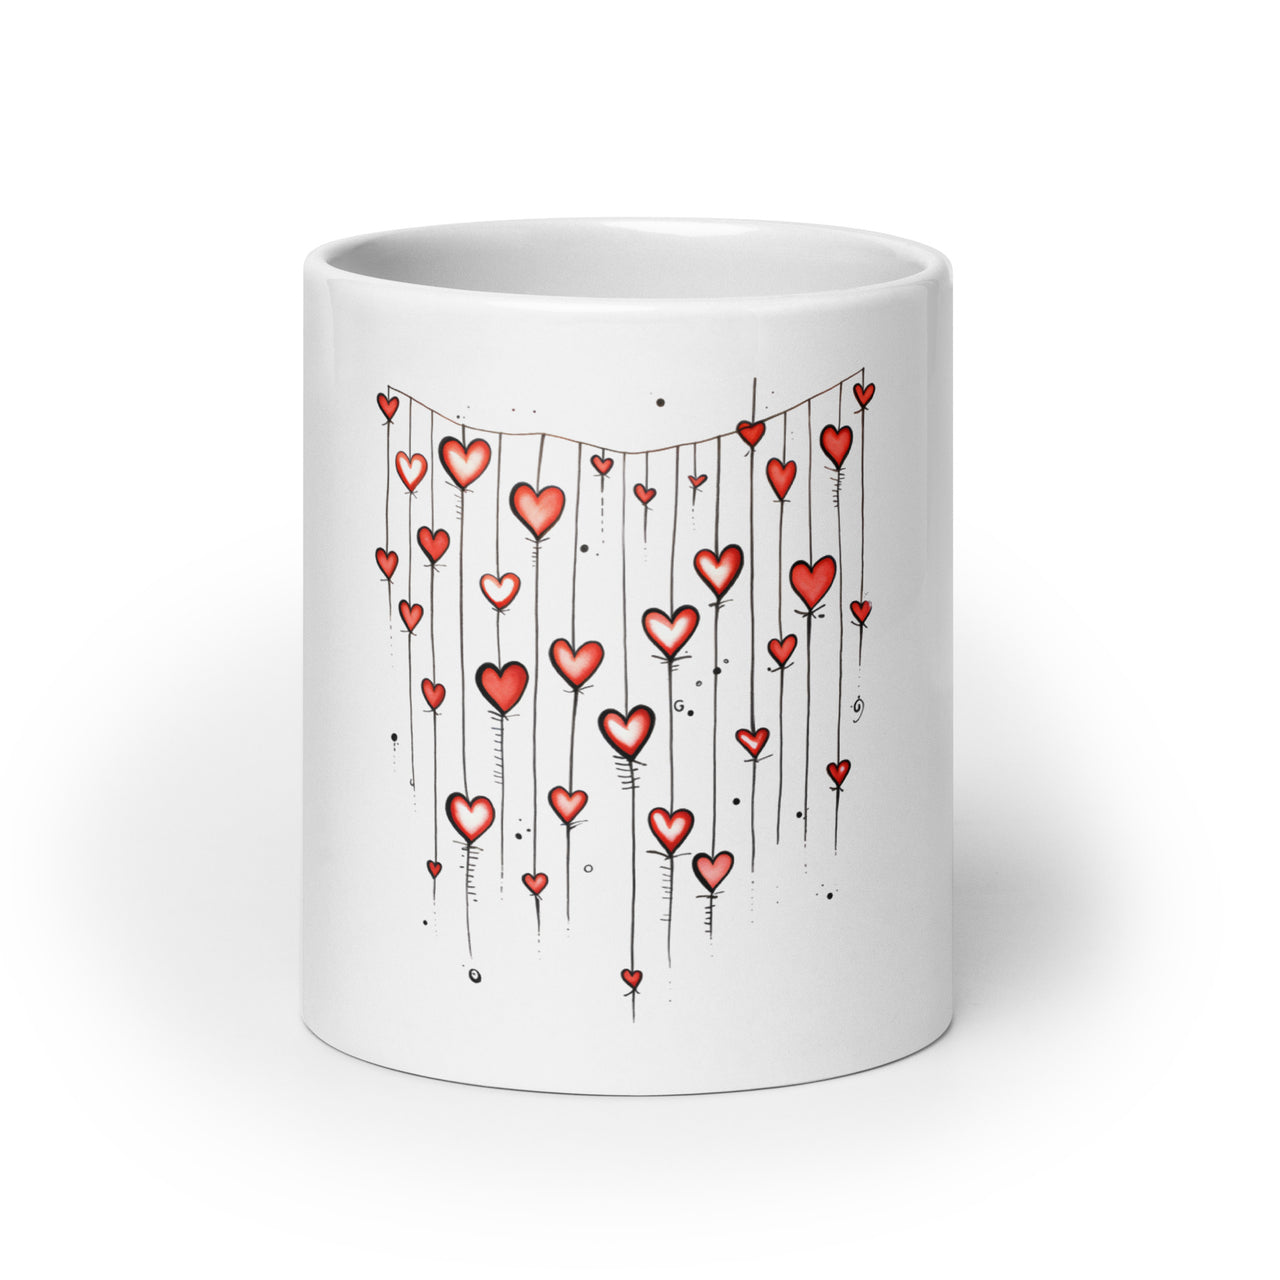 Hearts on a String: Love Airs Out White Mug